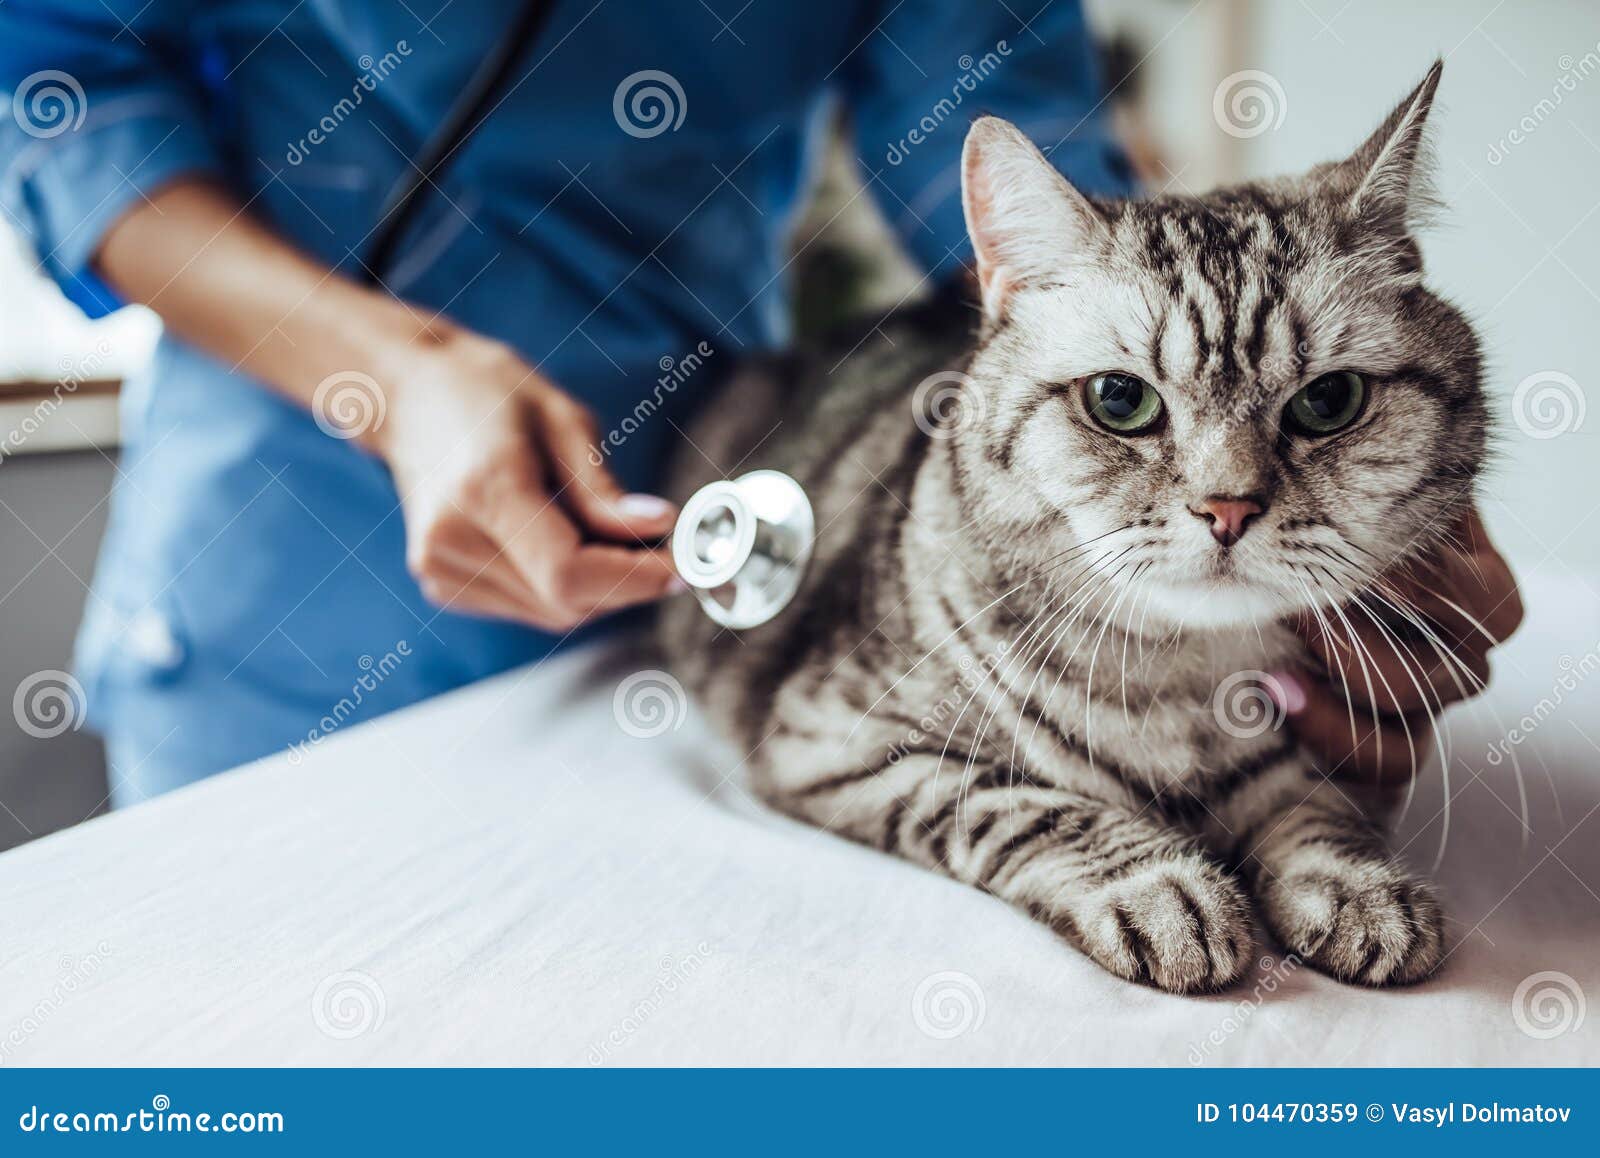 doctor veterinarian at clinic